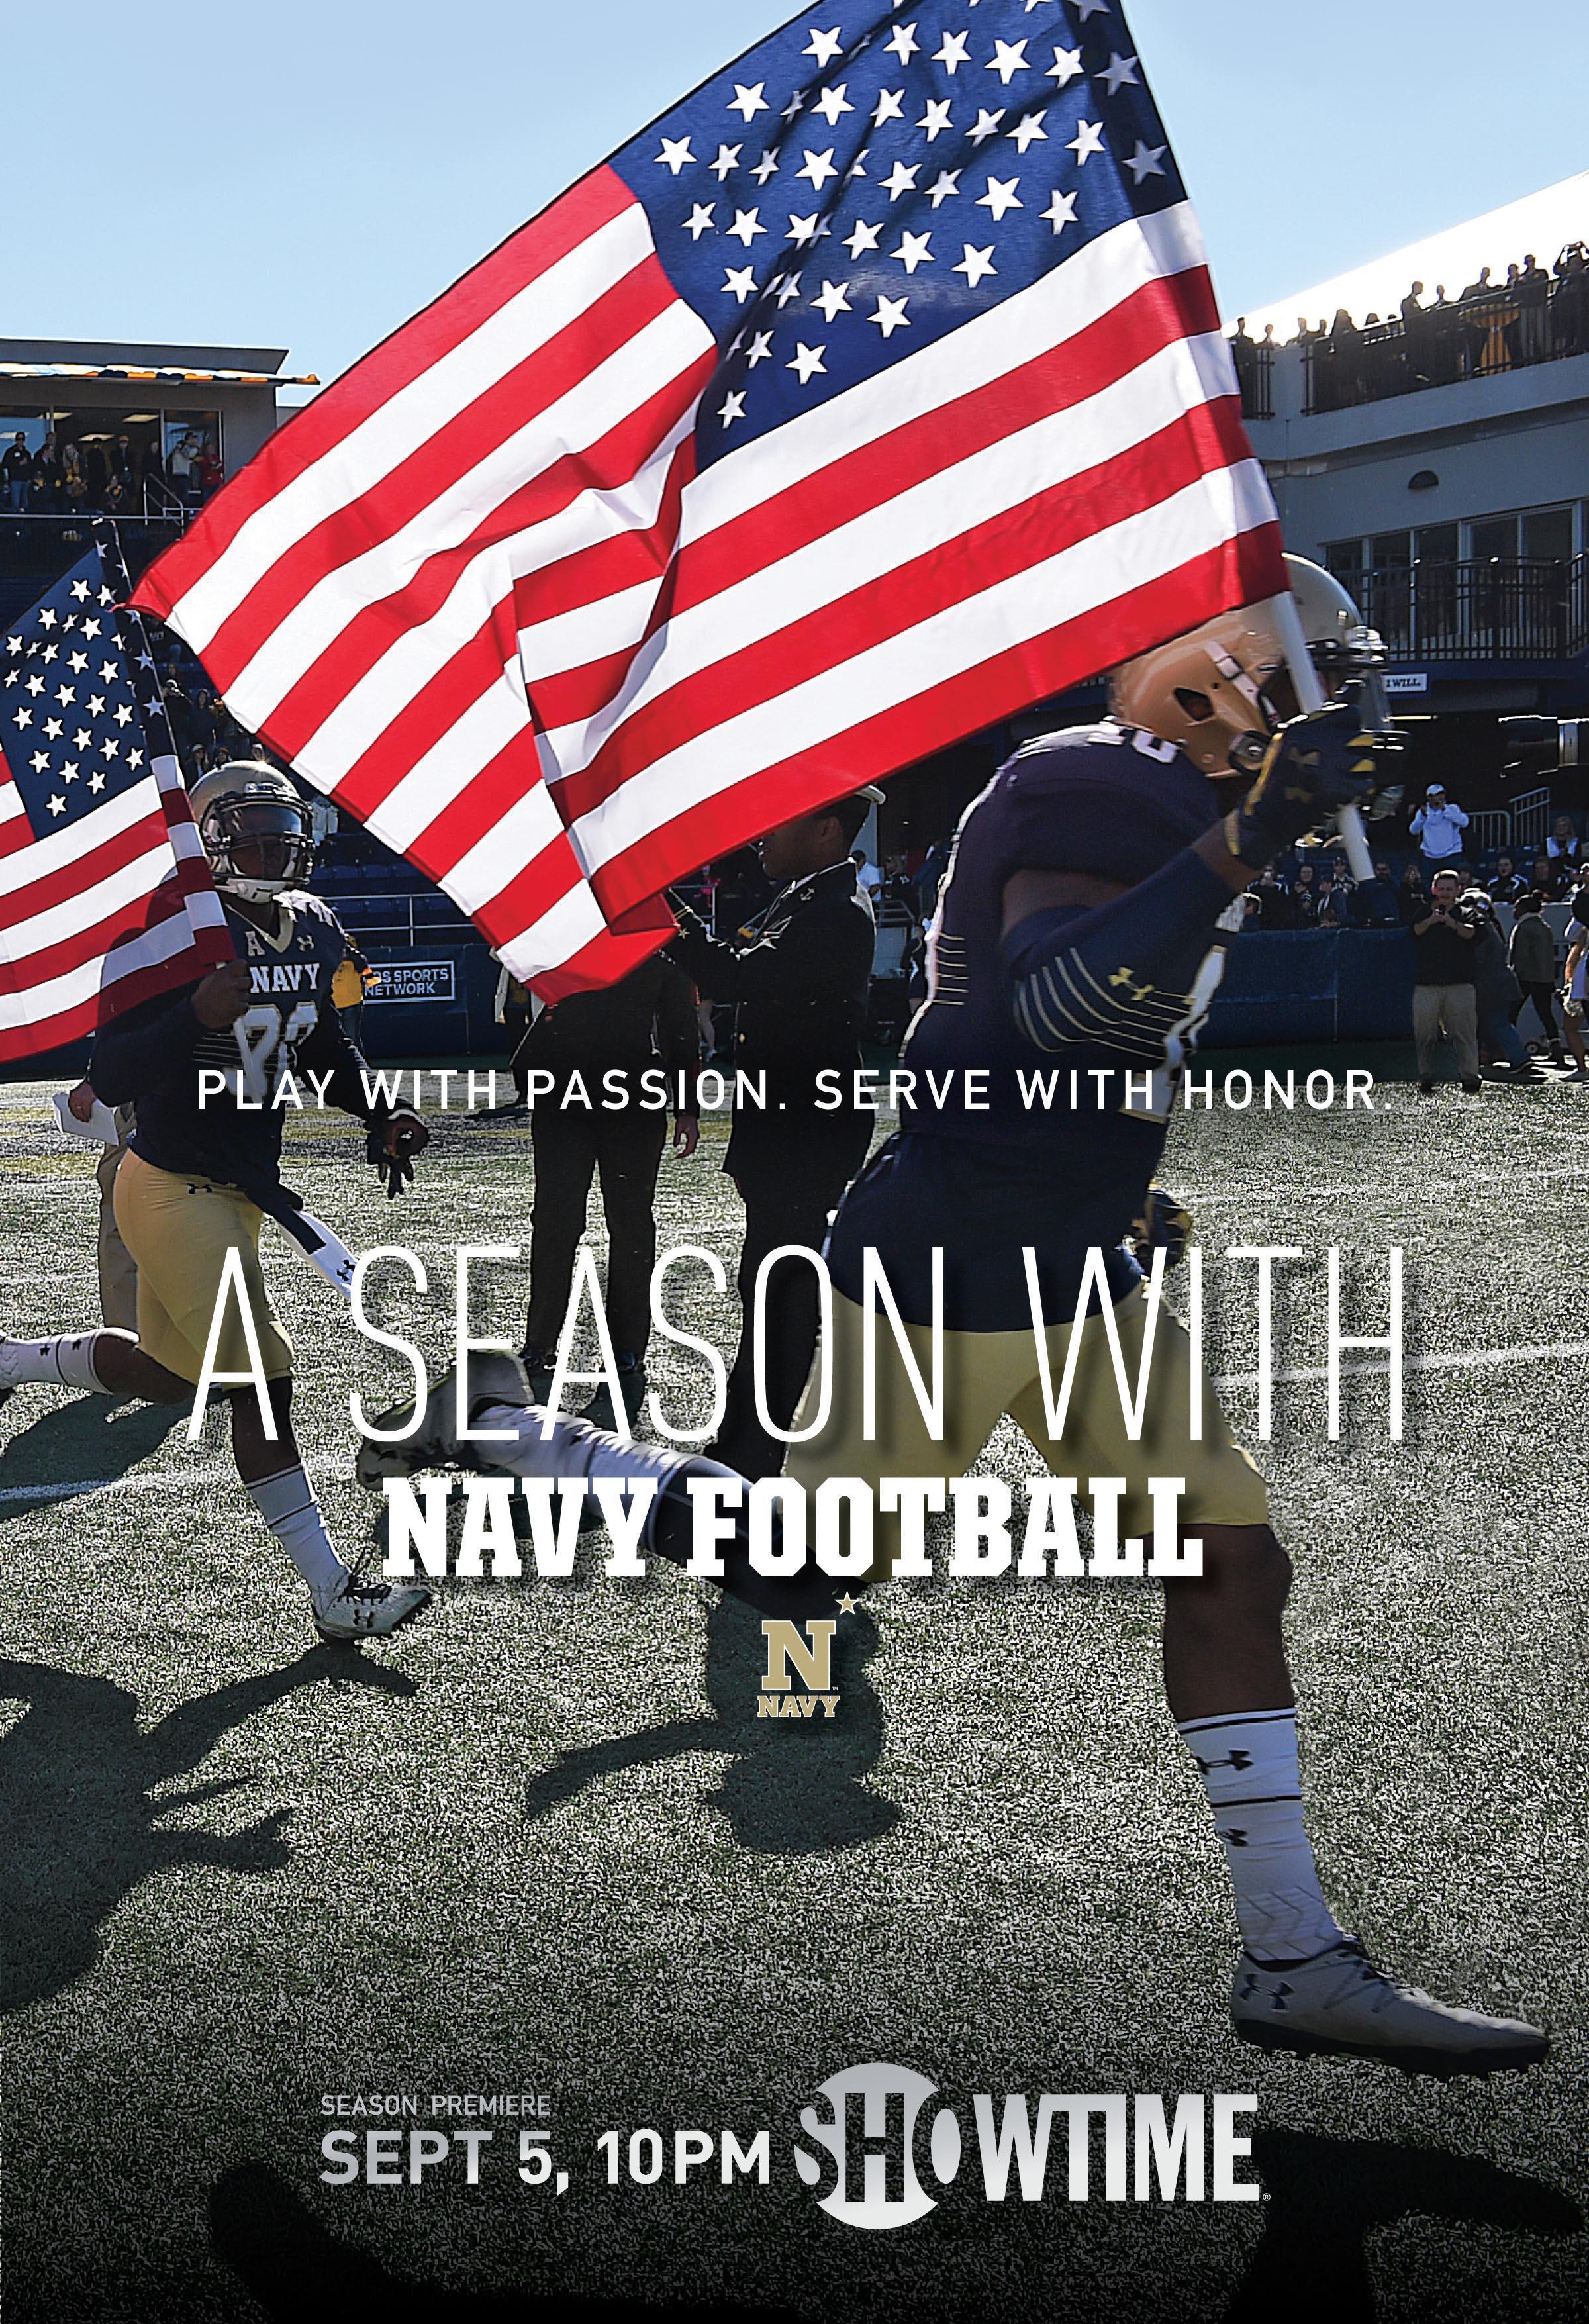 TV ratings for A Season With Navy Football in Turquía. SHOWTIME TV series